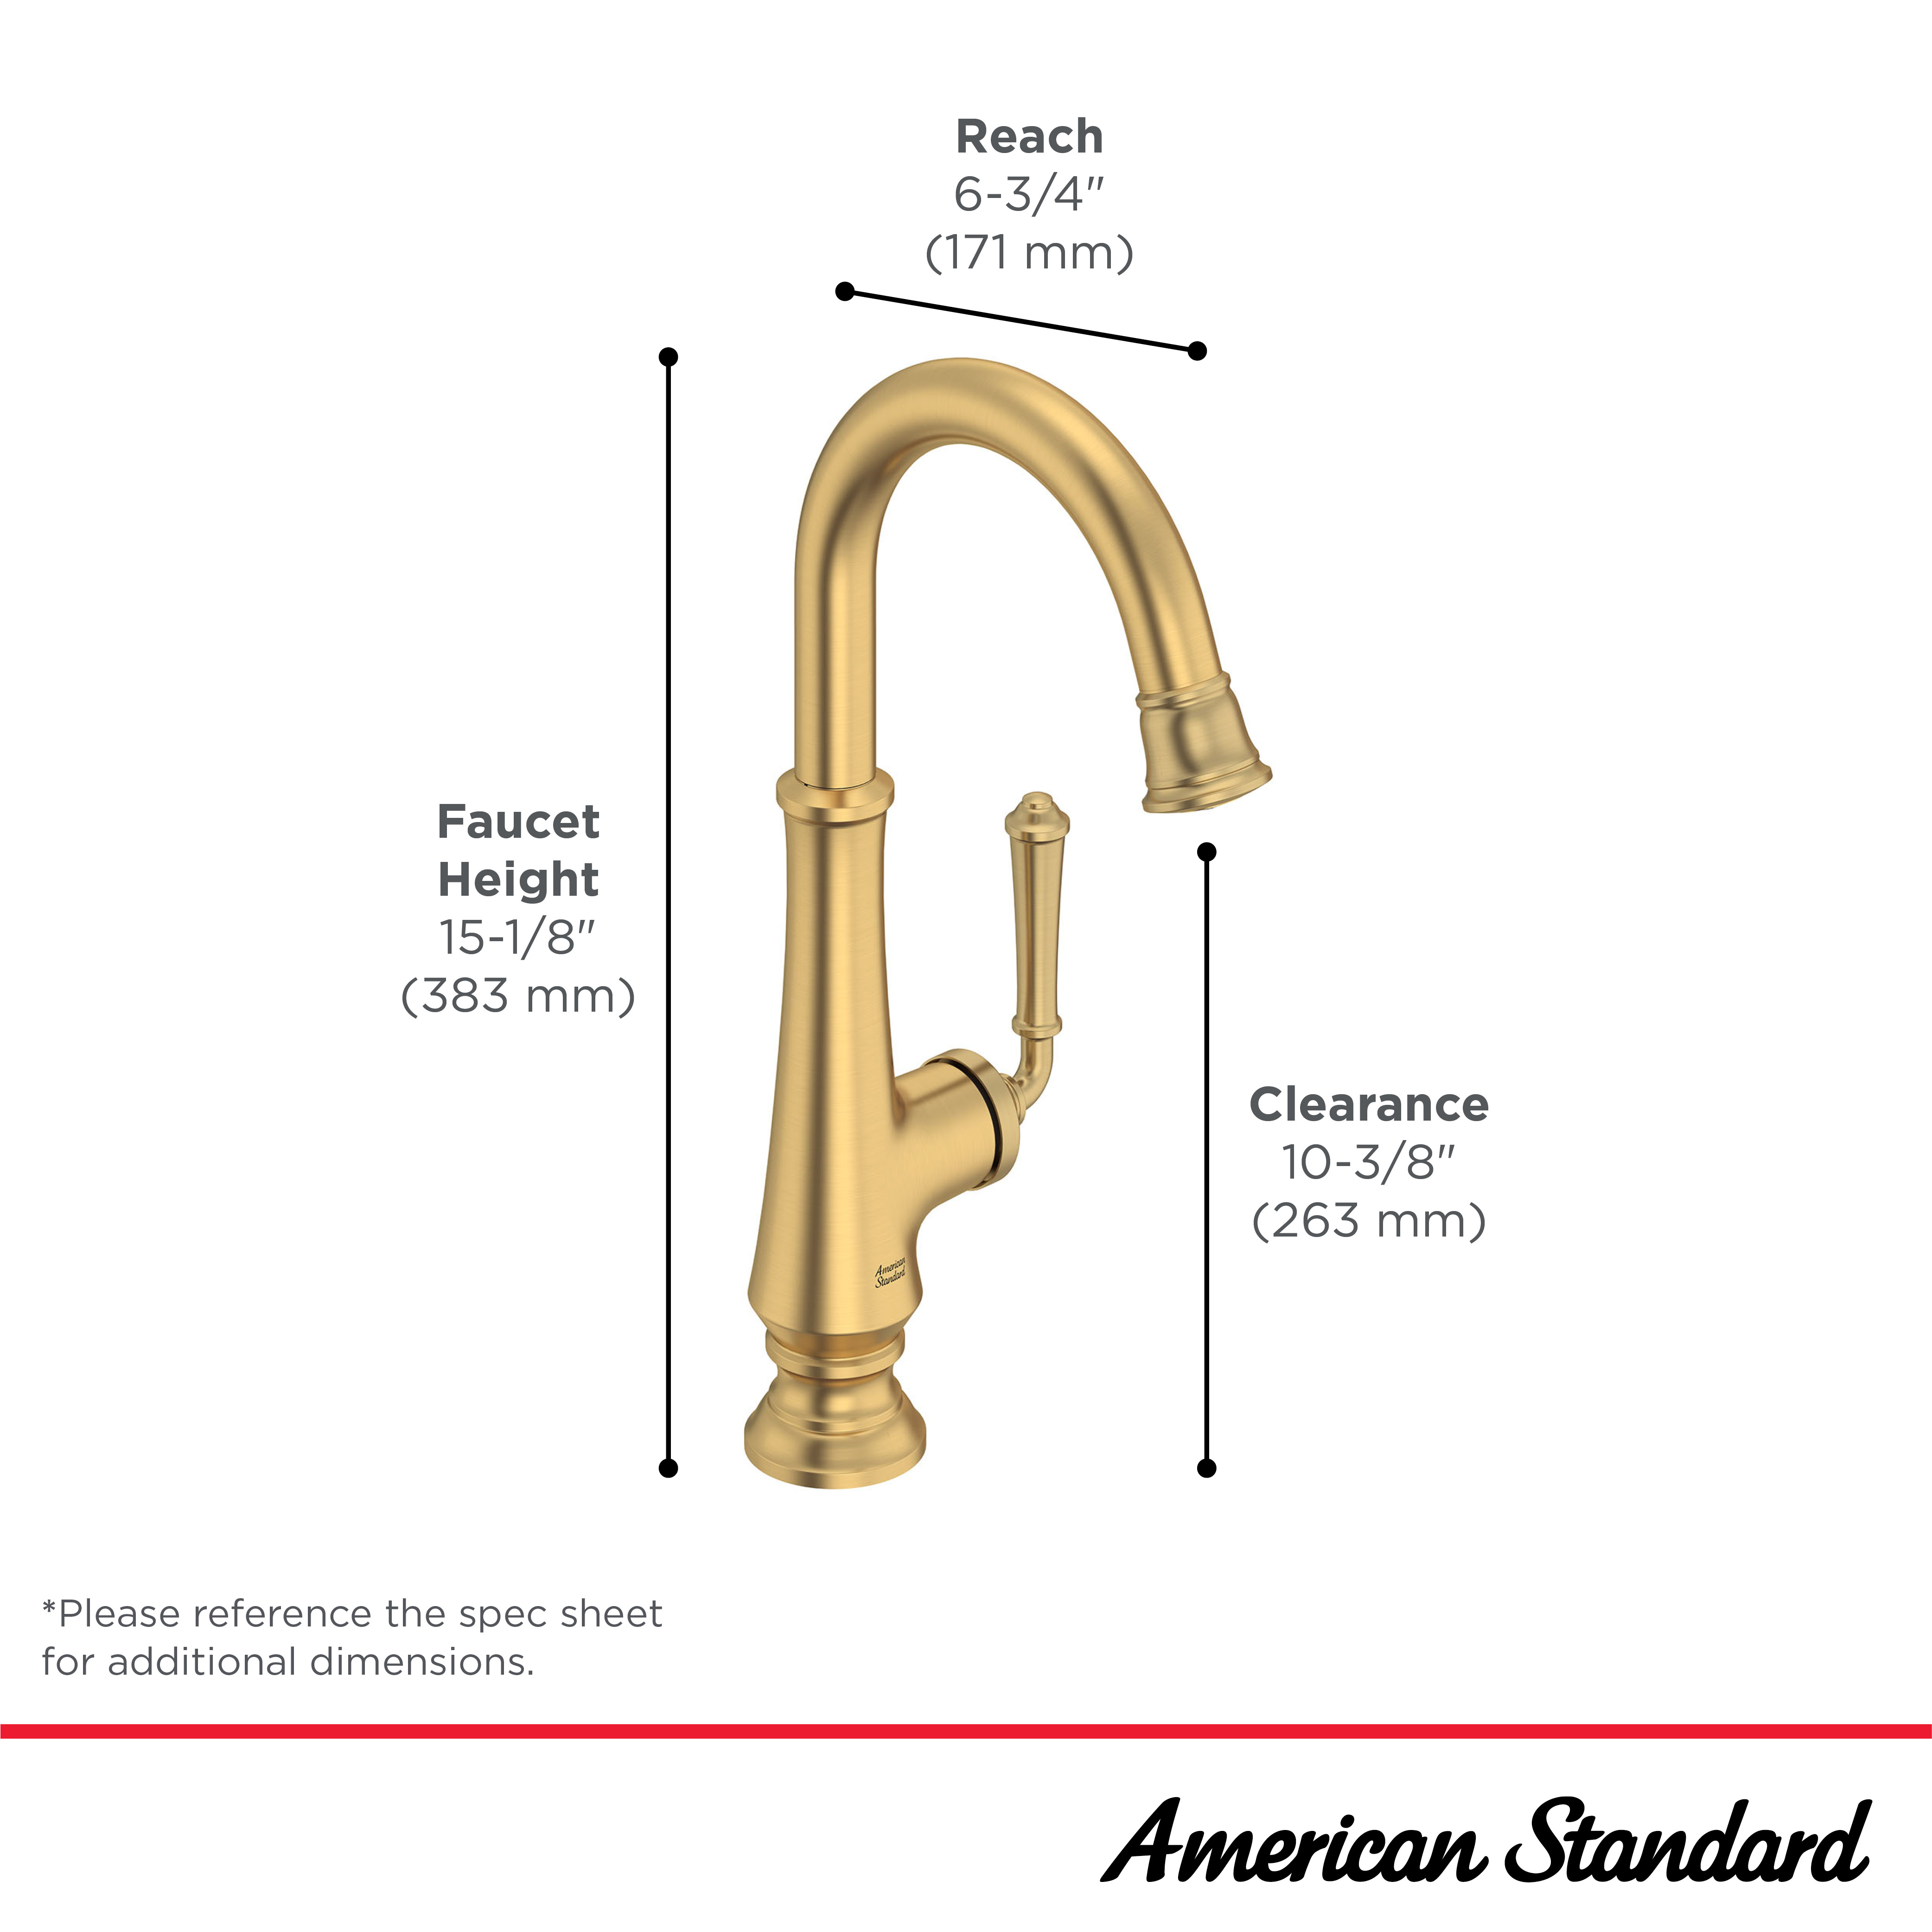 Delancey™ Single-Handle Pull-Down Bar Faucet 1.5 gpm/5.7 L/min